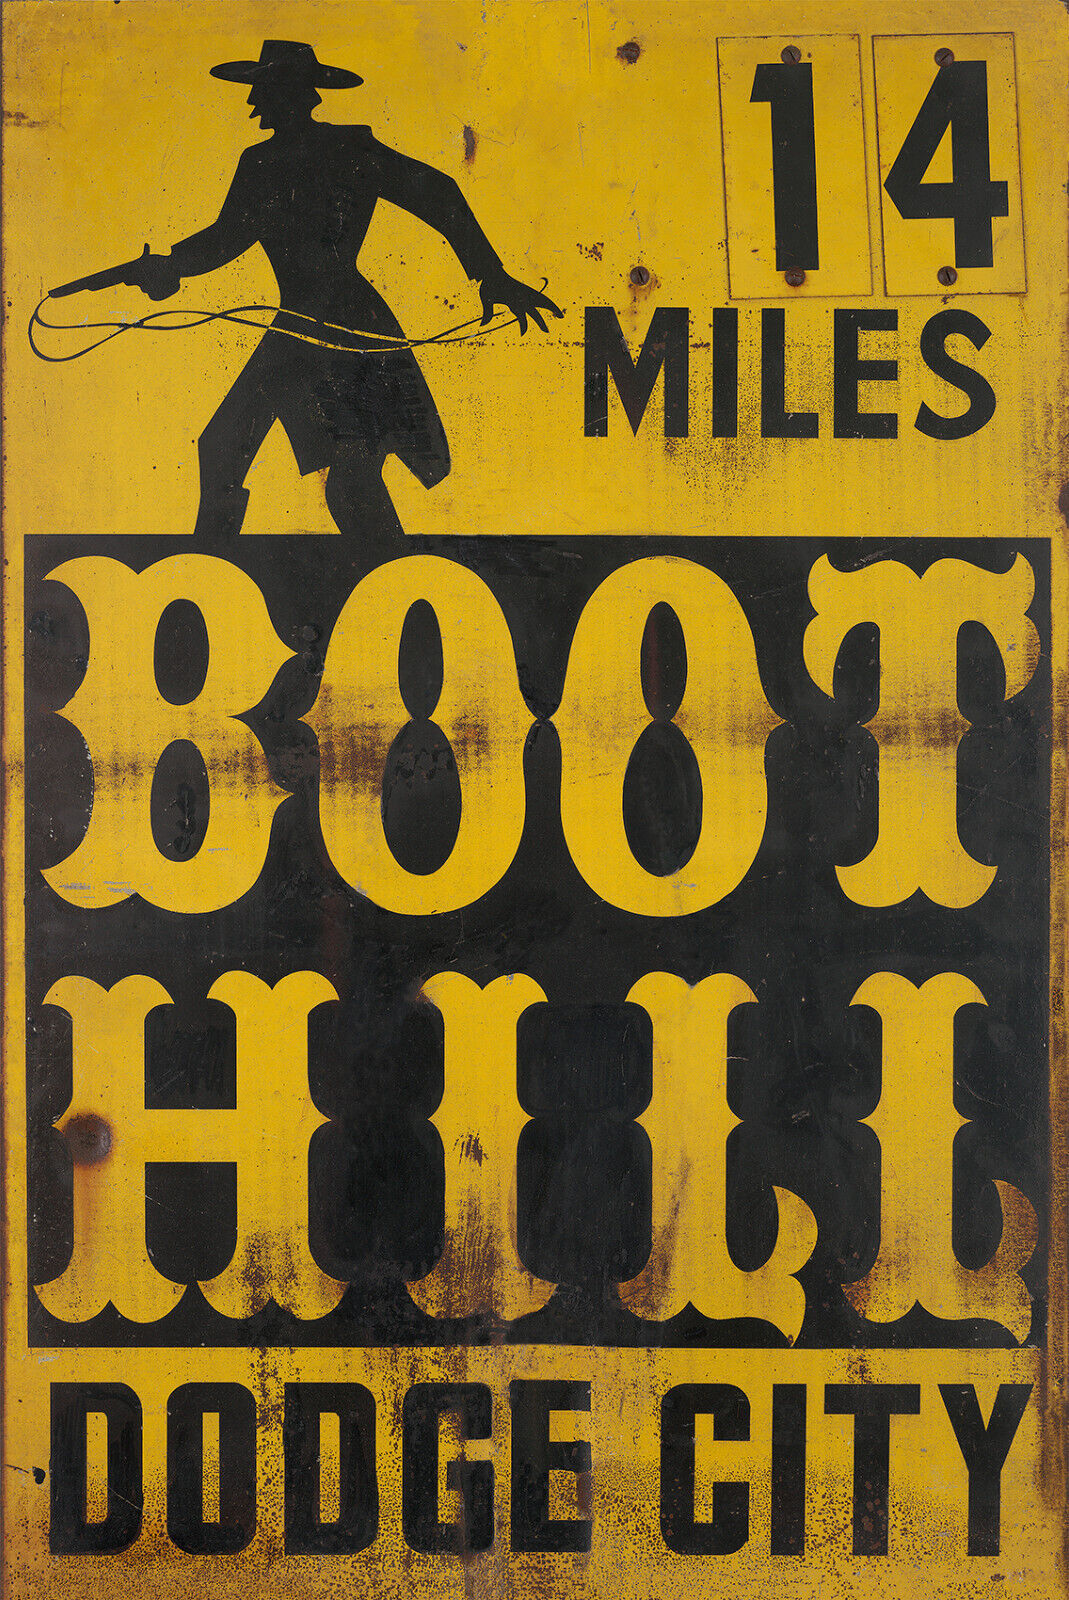 BOOT HILL - DODGE CITY ADVERTISING METAL SIGN